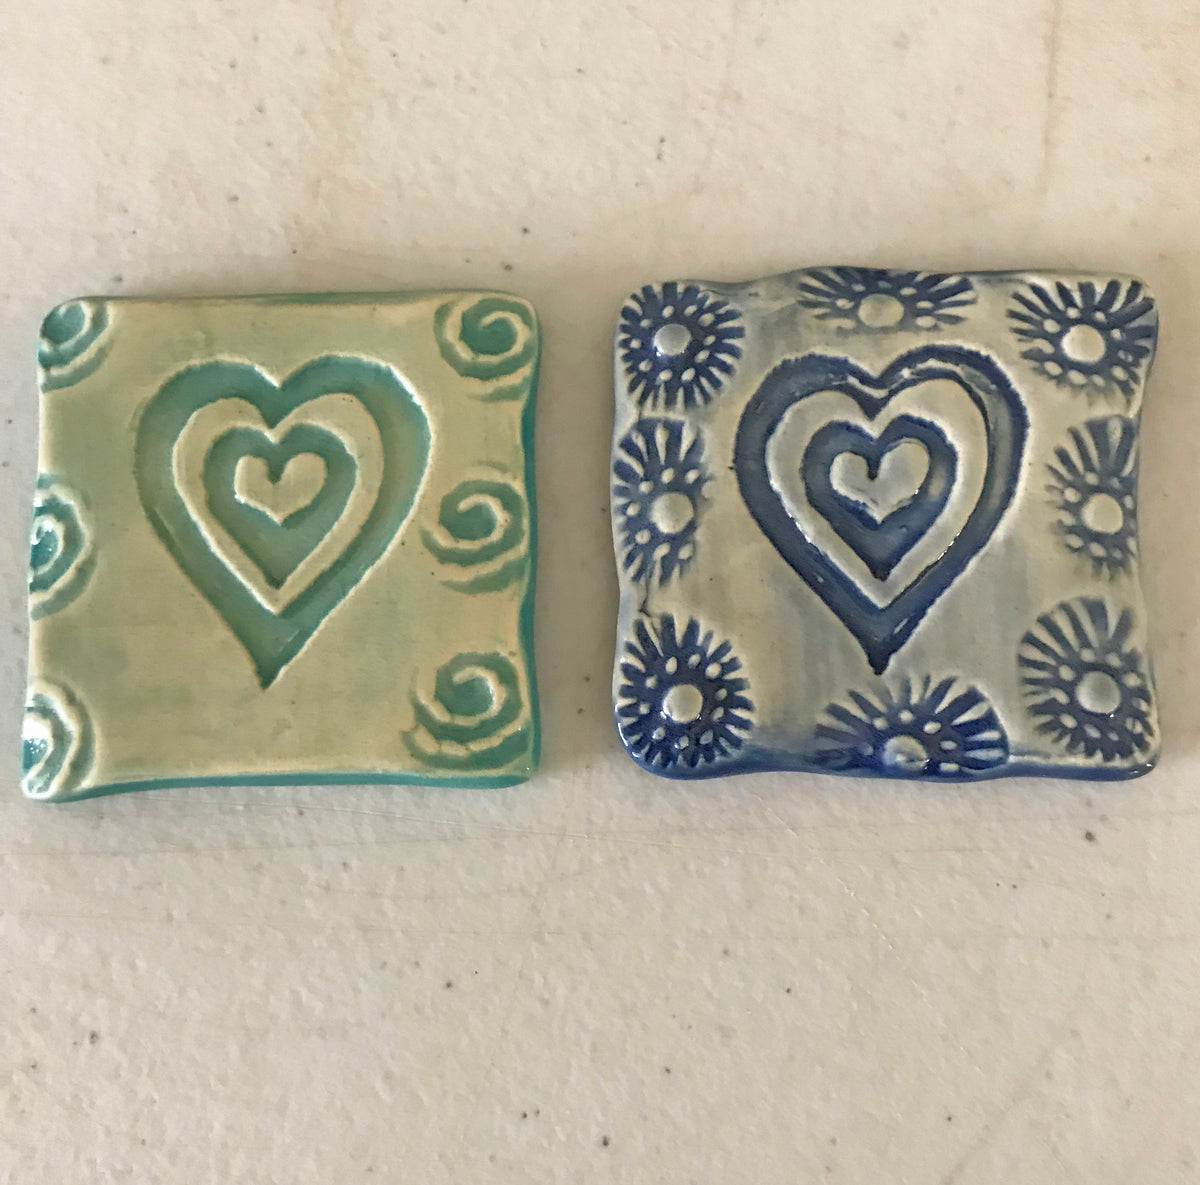 Magnets decorated with a simple heart design.  Handmade and each varies.